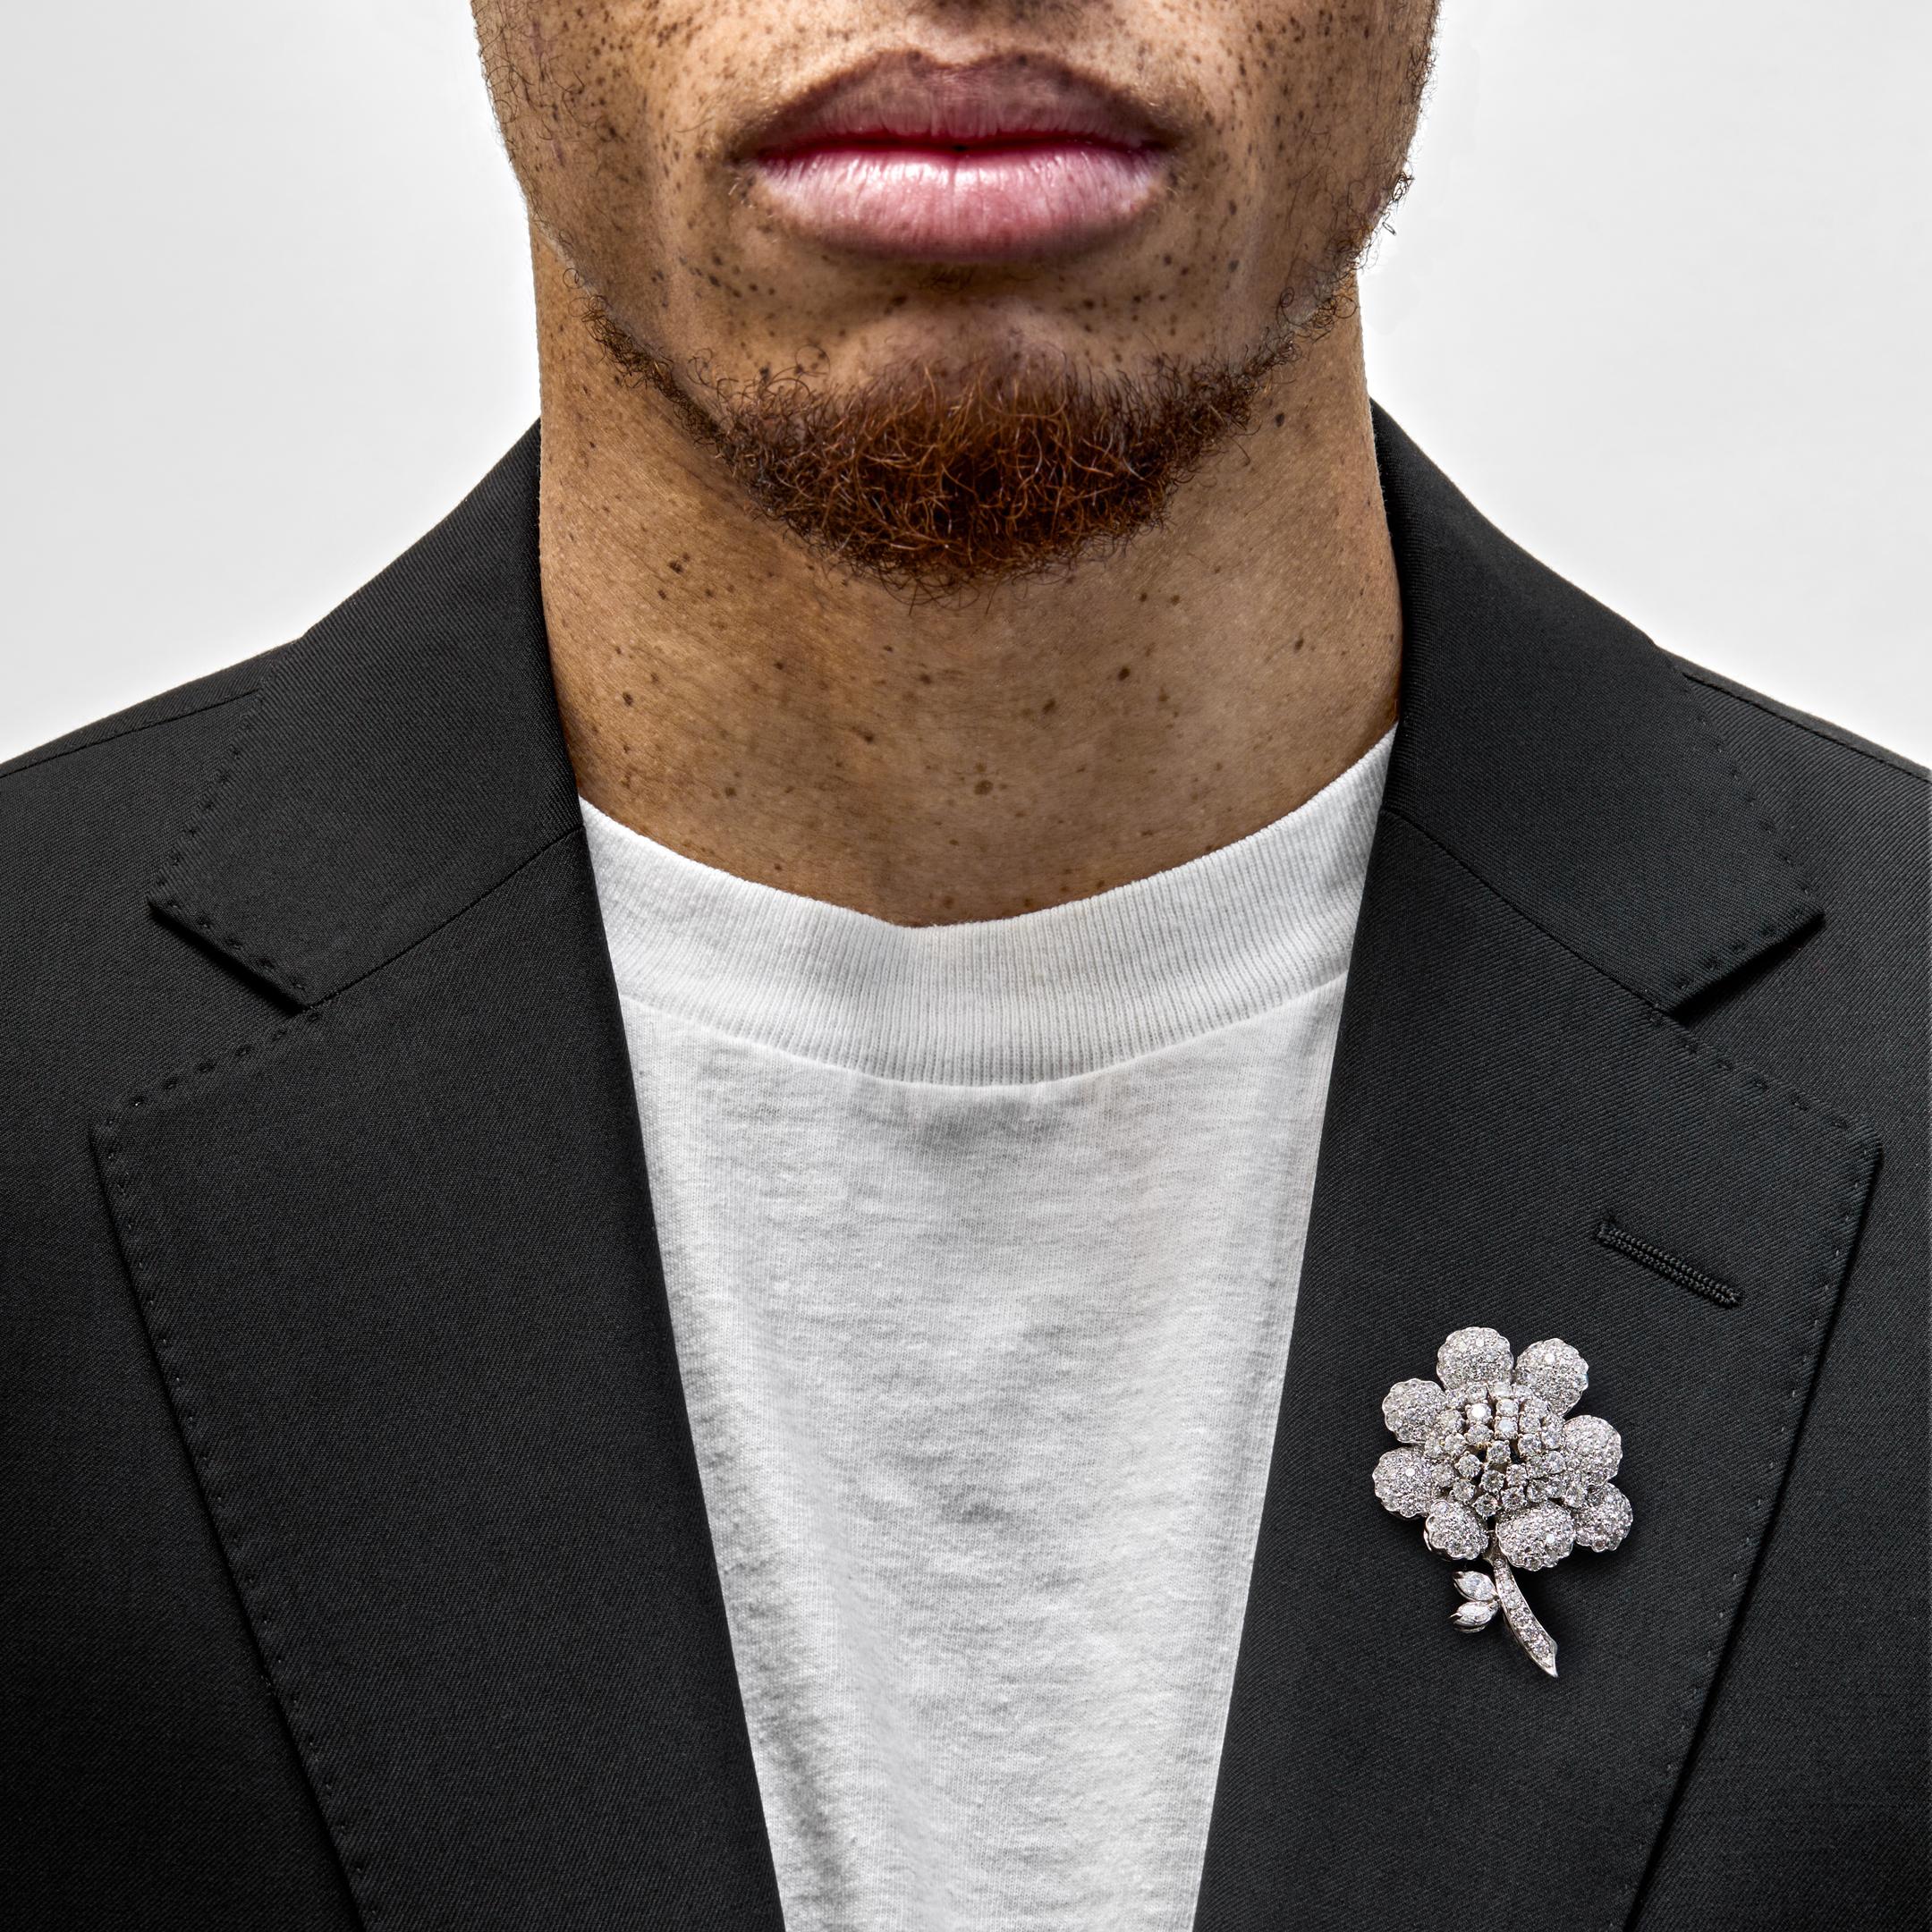 This retro floral brooch, likely crafted in the mid-19th century, is a style lover’s dream. Entirely encrusted in more than 7 carats of diamonds set in 18-karat gold, the maximalist accessory adds a jaunty, debonair quality to a suit